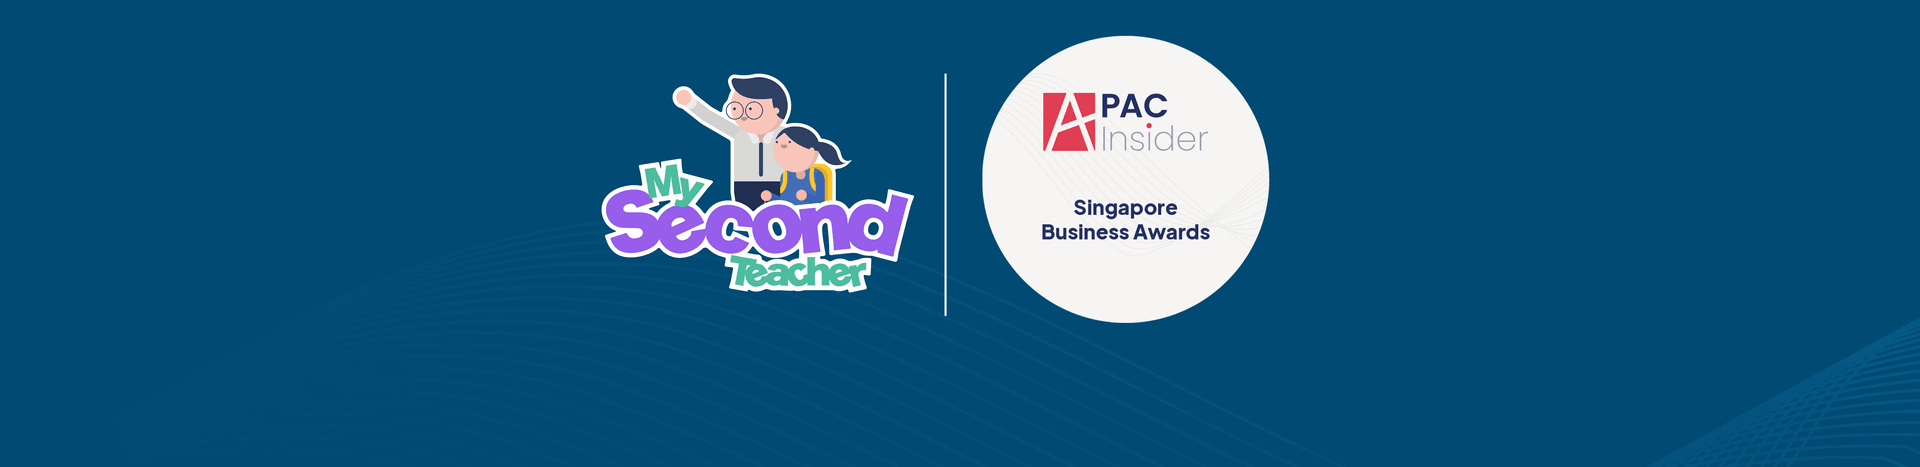 mySecondTeacher recognised as “Best eLearning Technology Company – APAC” in the 2023 Singapore Business Award Winners